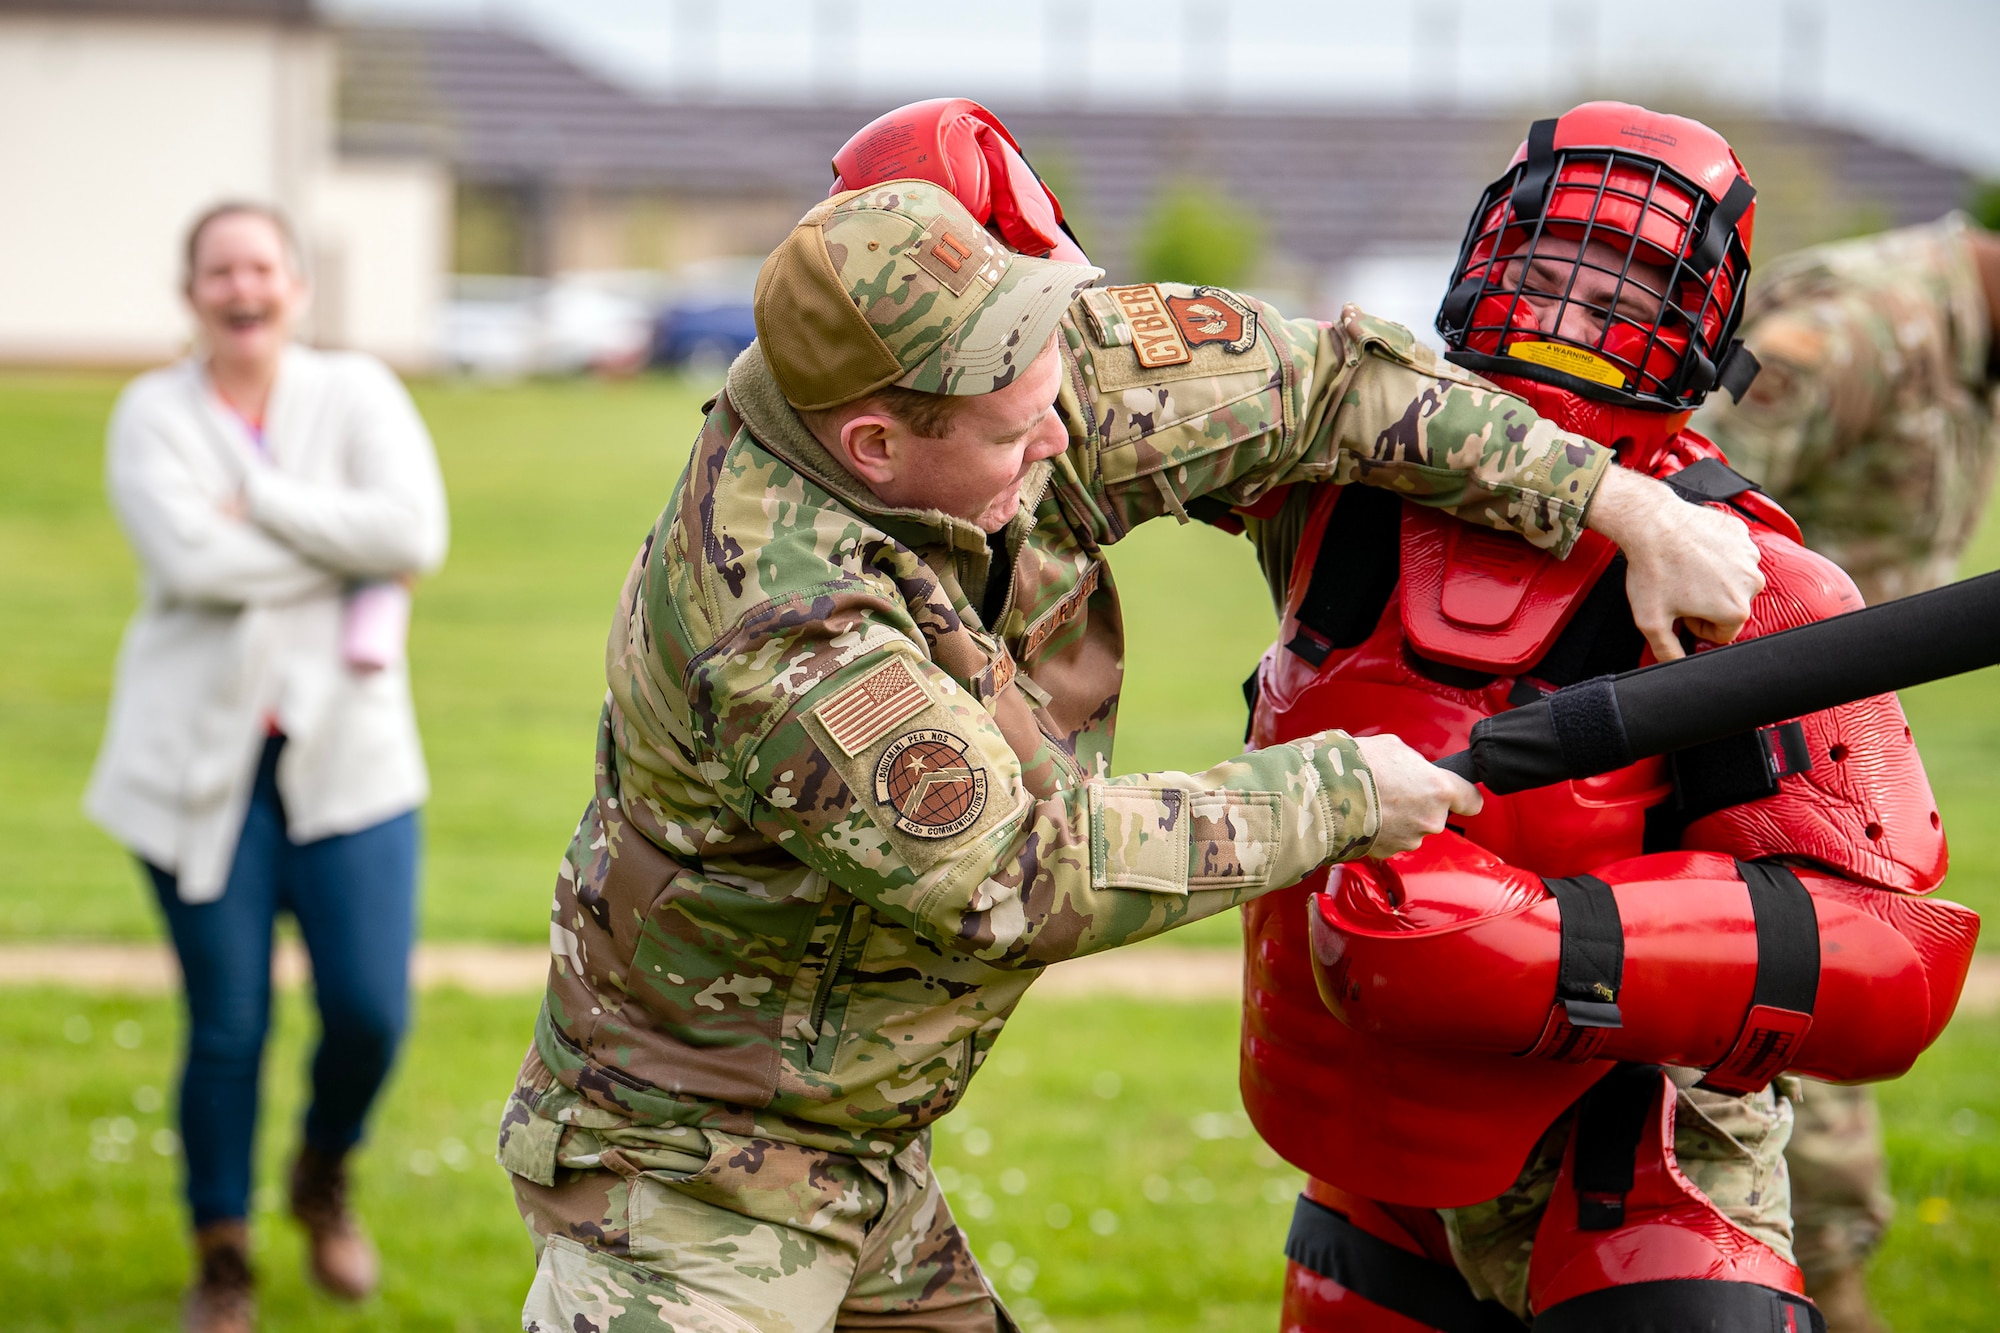 U.S. Air Force Senior Airman Ambrose Ross, right, demonstrates combatives with Capt. Nathaniel Osborne, 423d Communications Squadron flight commander at RAF Alconbury, England, May 18, 2023. The demonstration was a part of National Police Week where members from SFS engaged with and demonstrated police capabilities to students from Alconbury Elementary school. (U.S. Air Force photo by Staff Sgt. Eugene Oliver